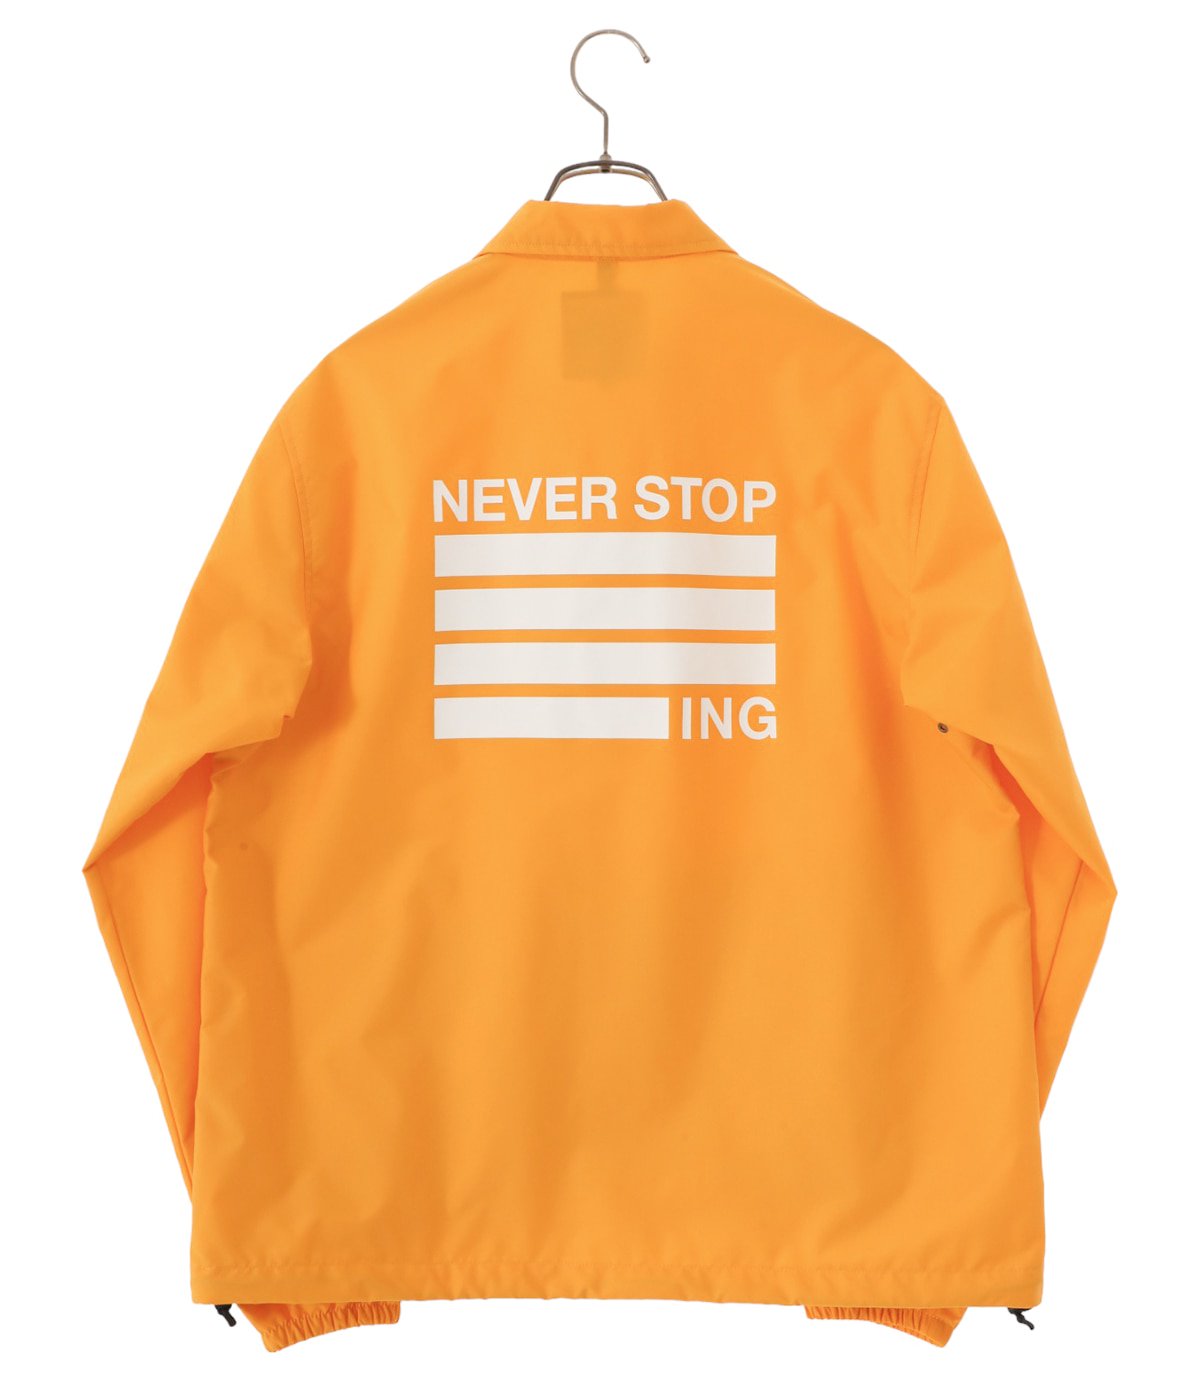 NEVER STOP ING The Coach Jacket THE NORTH FACE(ザ ノースフェイス) アウター ナイロンジャケット  (メンズ)の通販 ARKnets(アークネッツ) 公式通販 【正規取扱店】